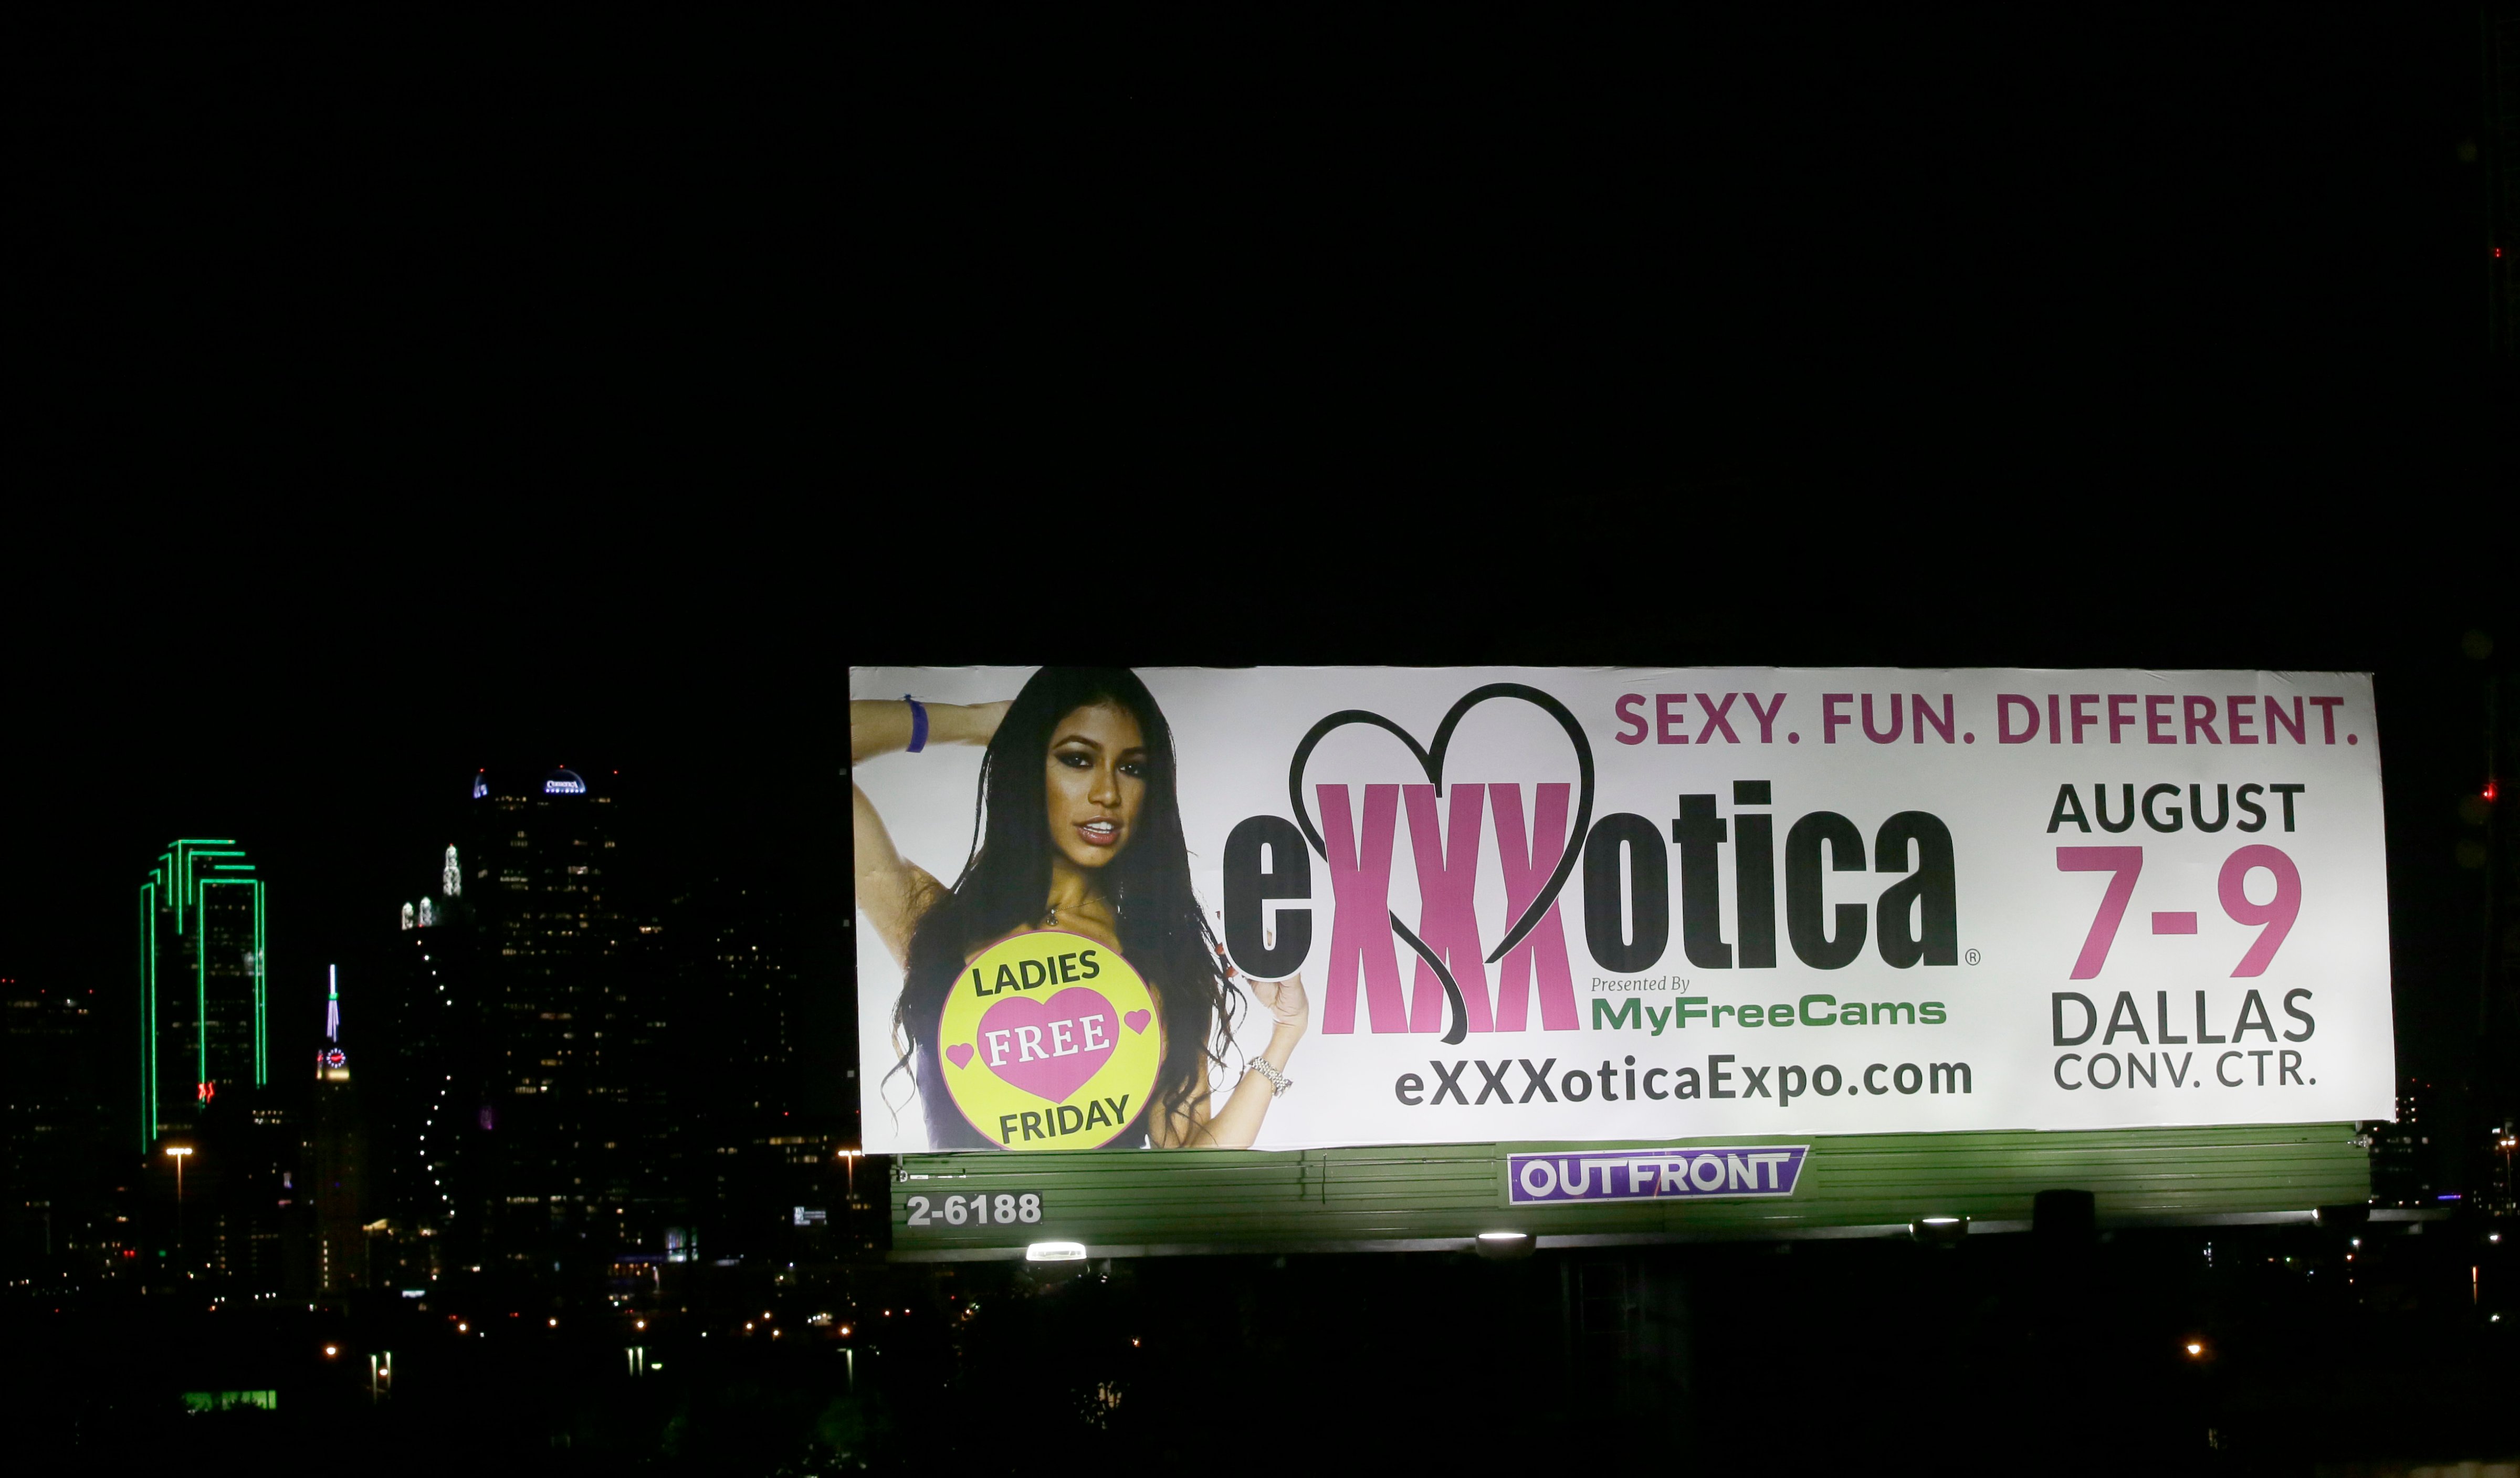 A billboard sign advertises the Exxxotica expo in Dallas, July 31, 2015. (LM Otero—AP)